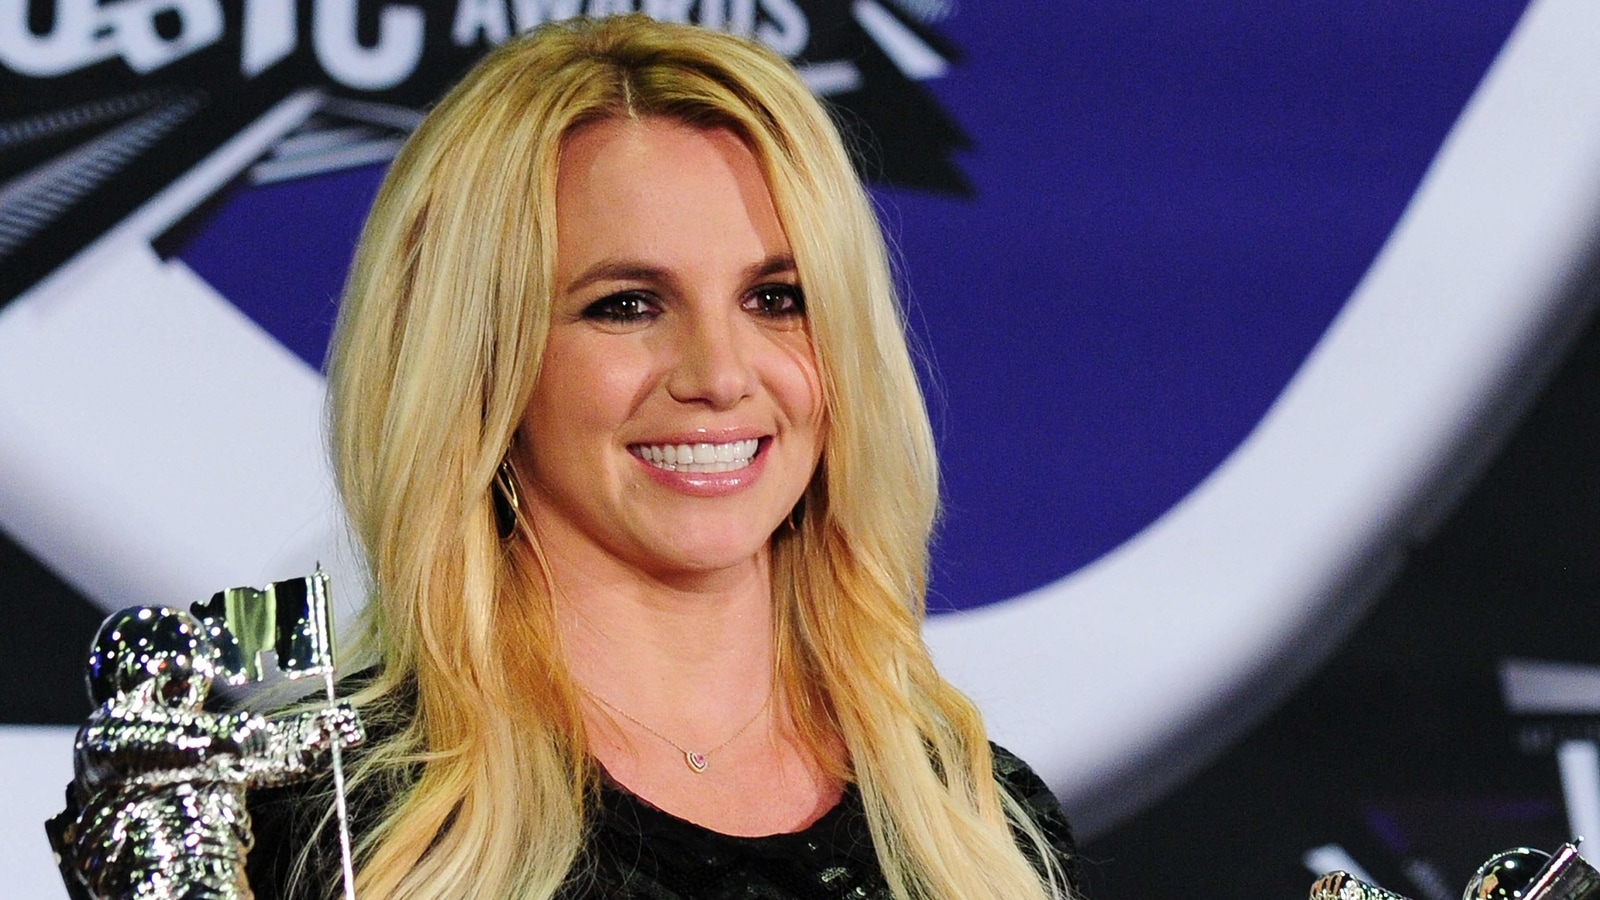 is britney spears free from her father's conservatorship